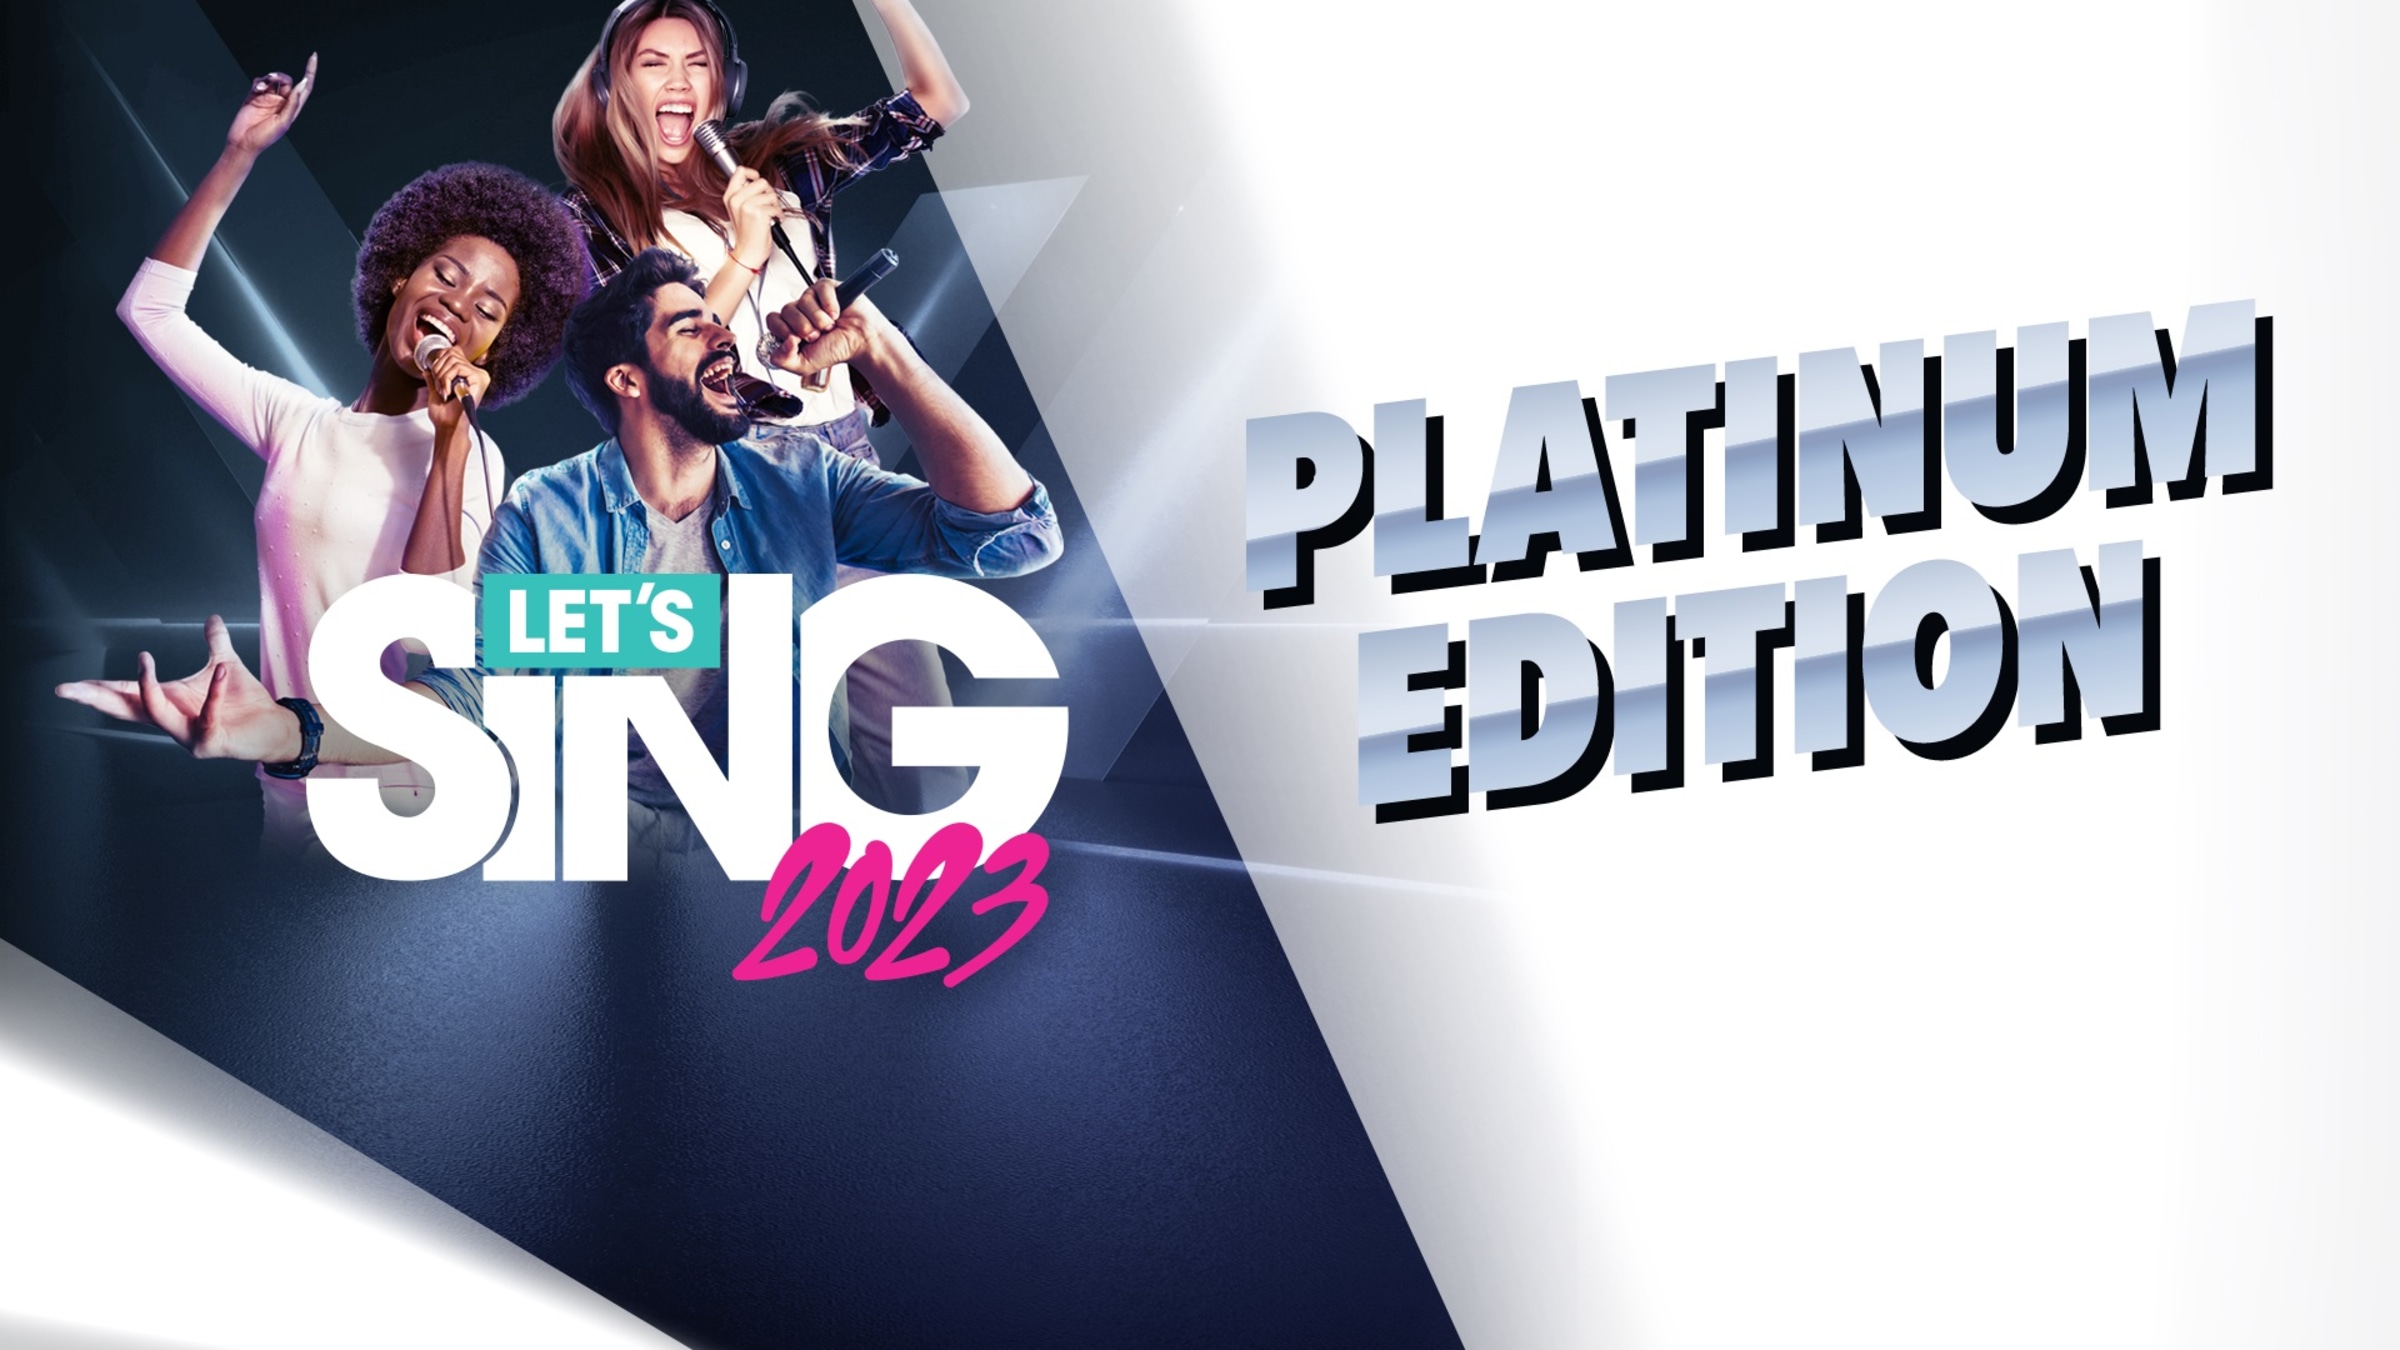 Let's Sing 2023 + 2 Micros - Jeux Nintendo Switch